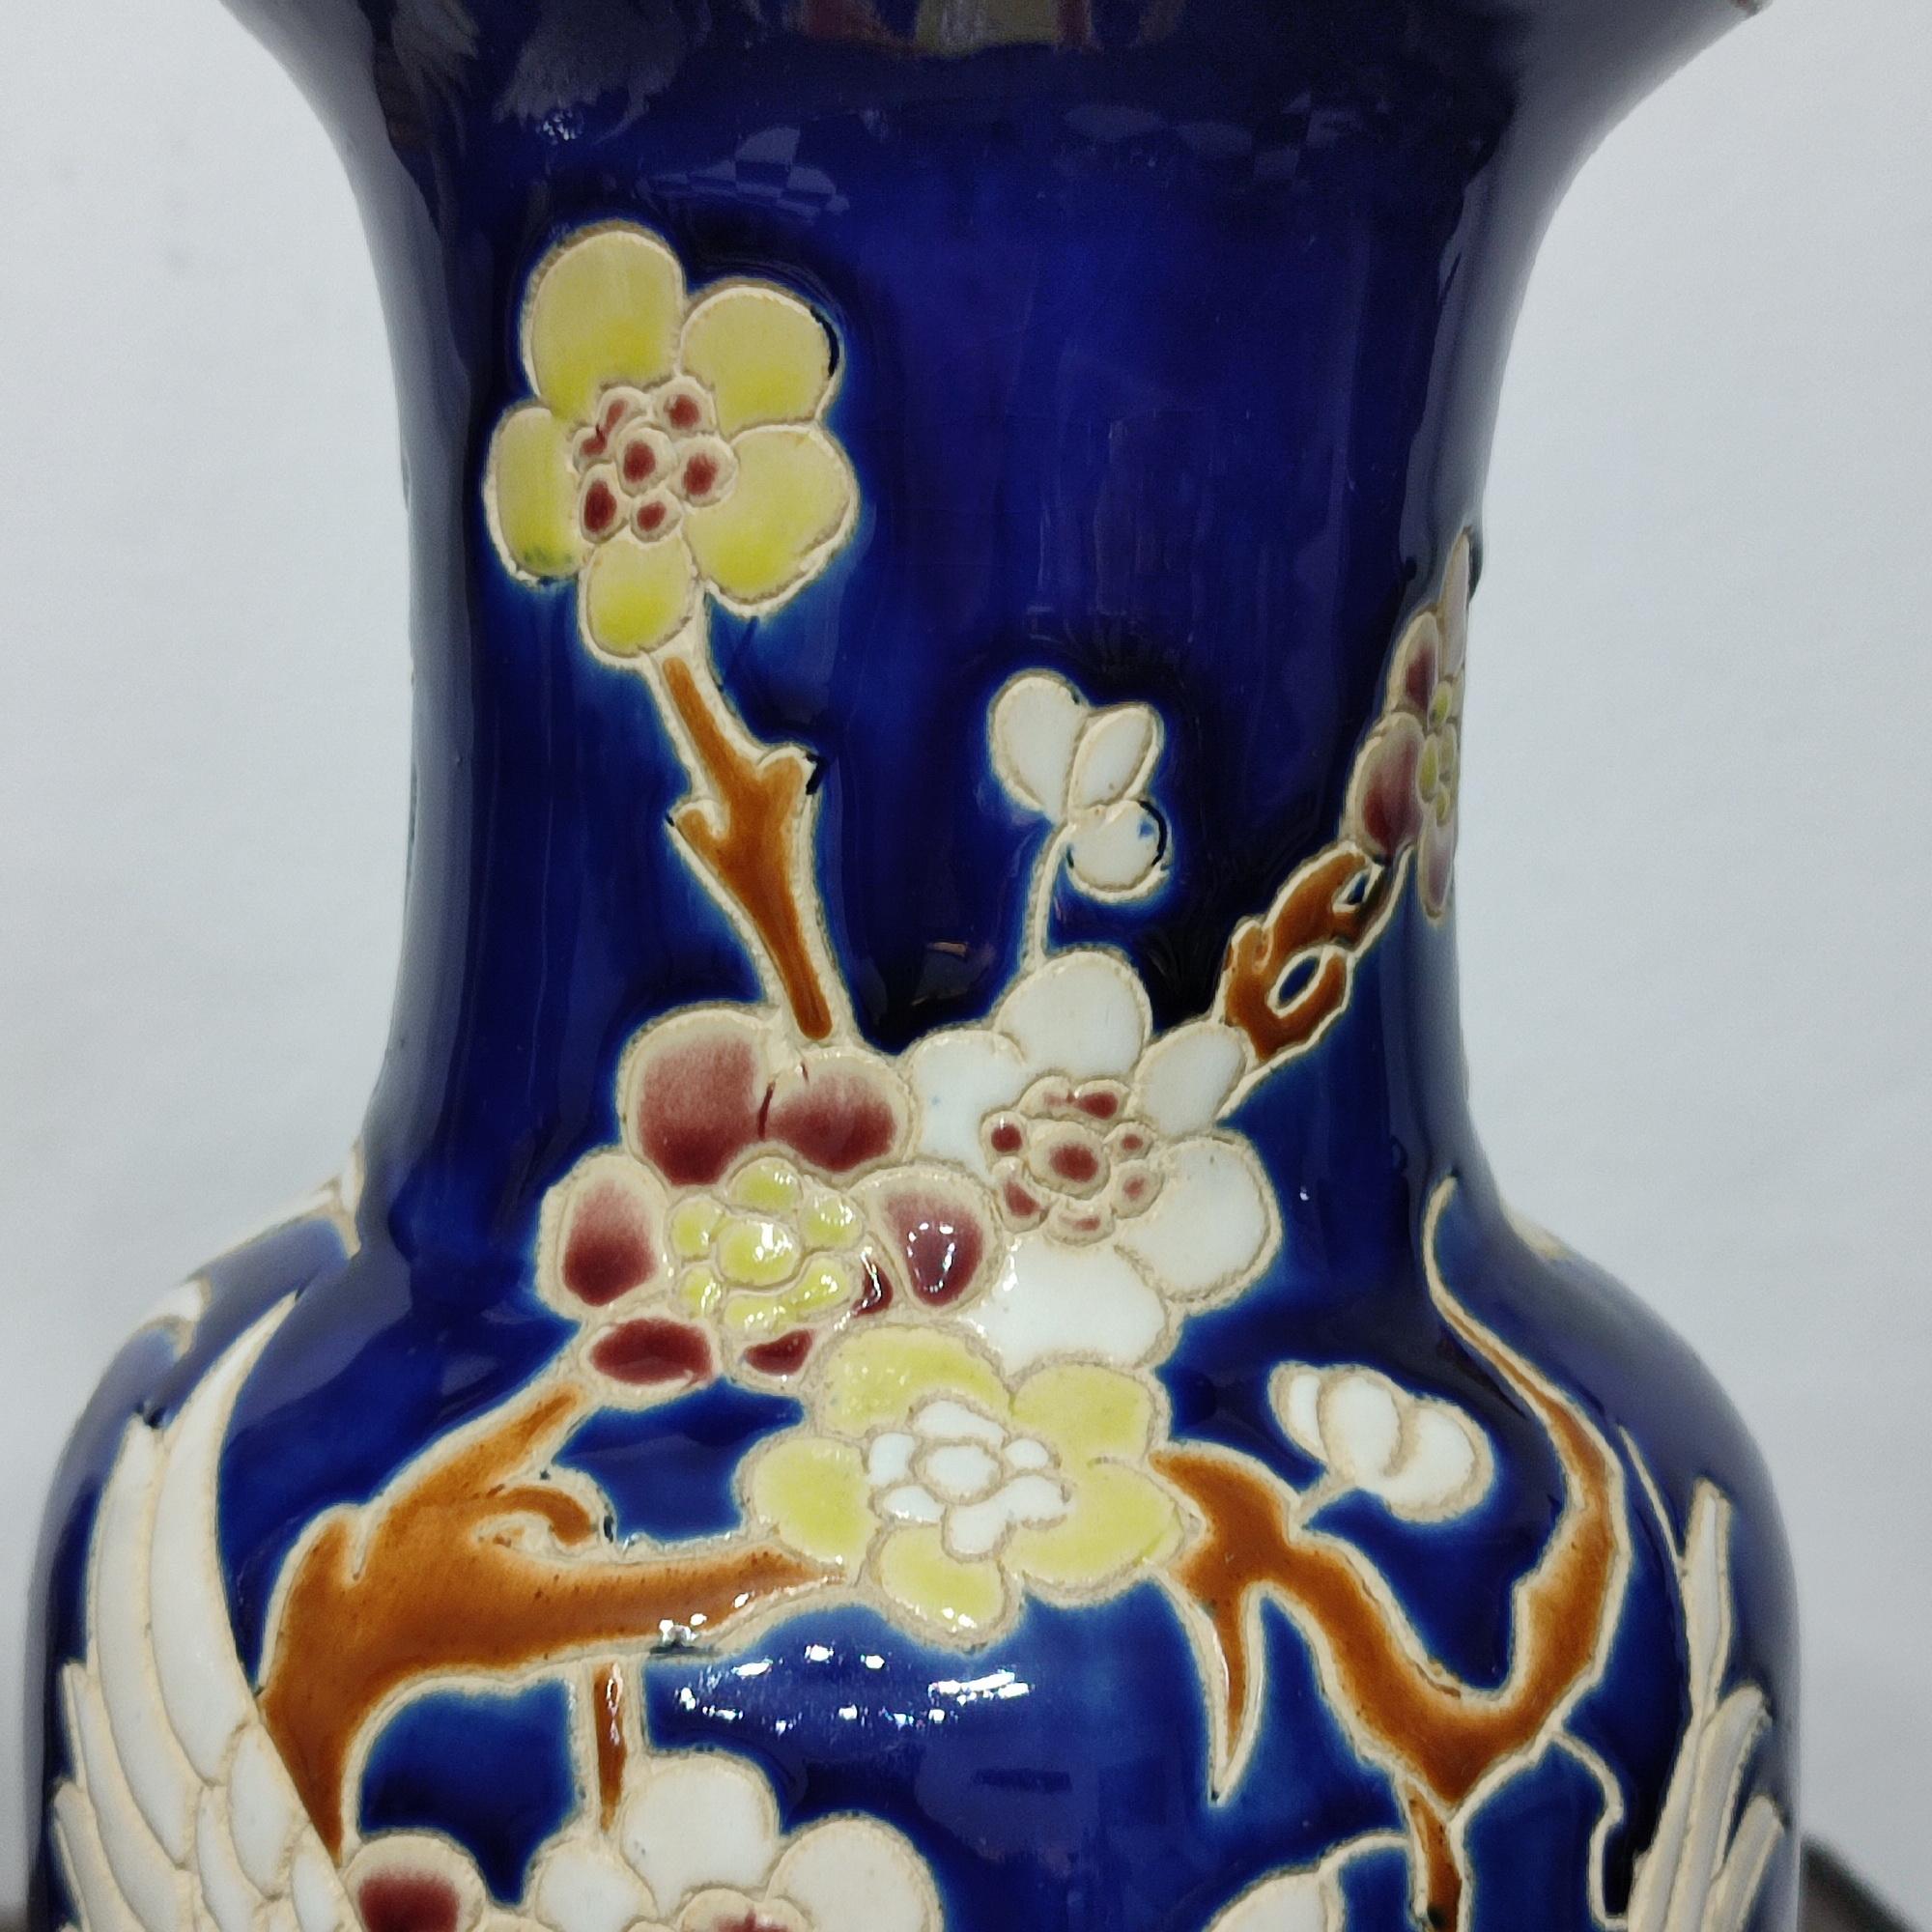 Pair of Ceramic Vases with Wonderful Flying Swans and Cherry Flowers Decor 4